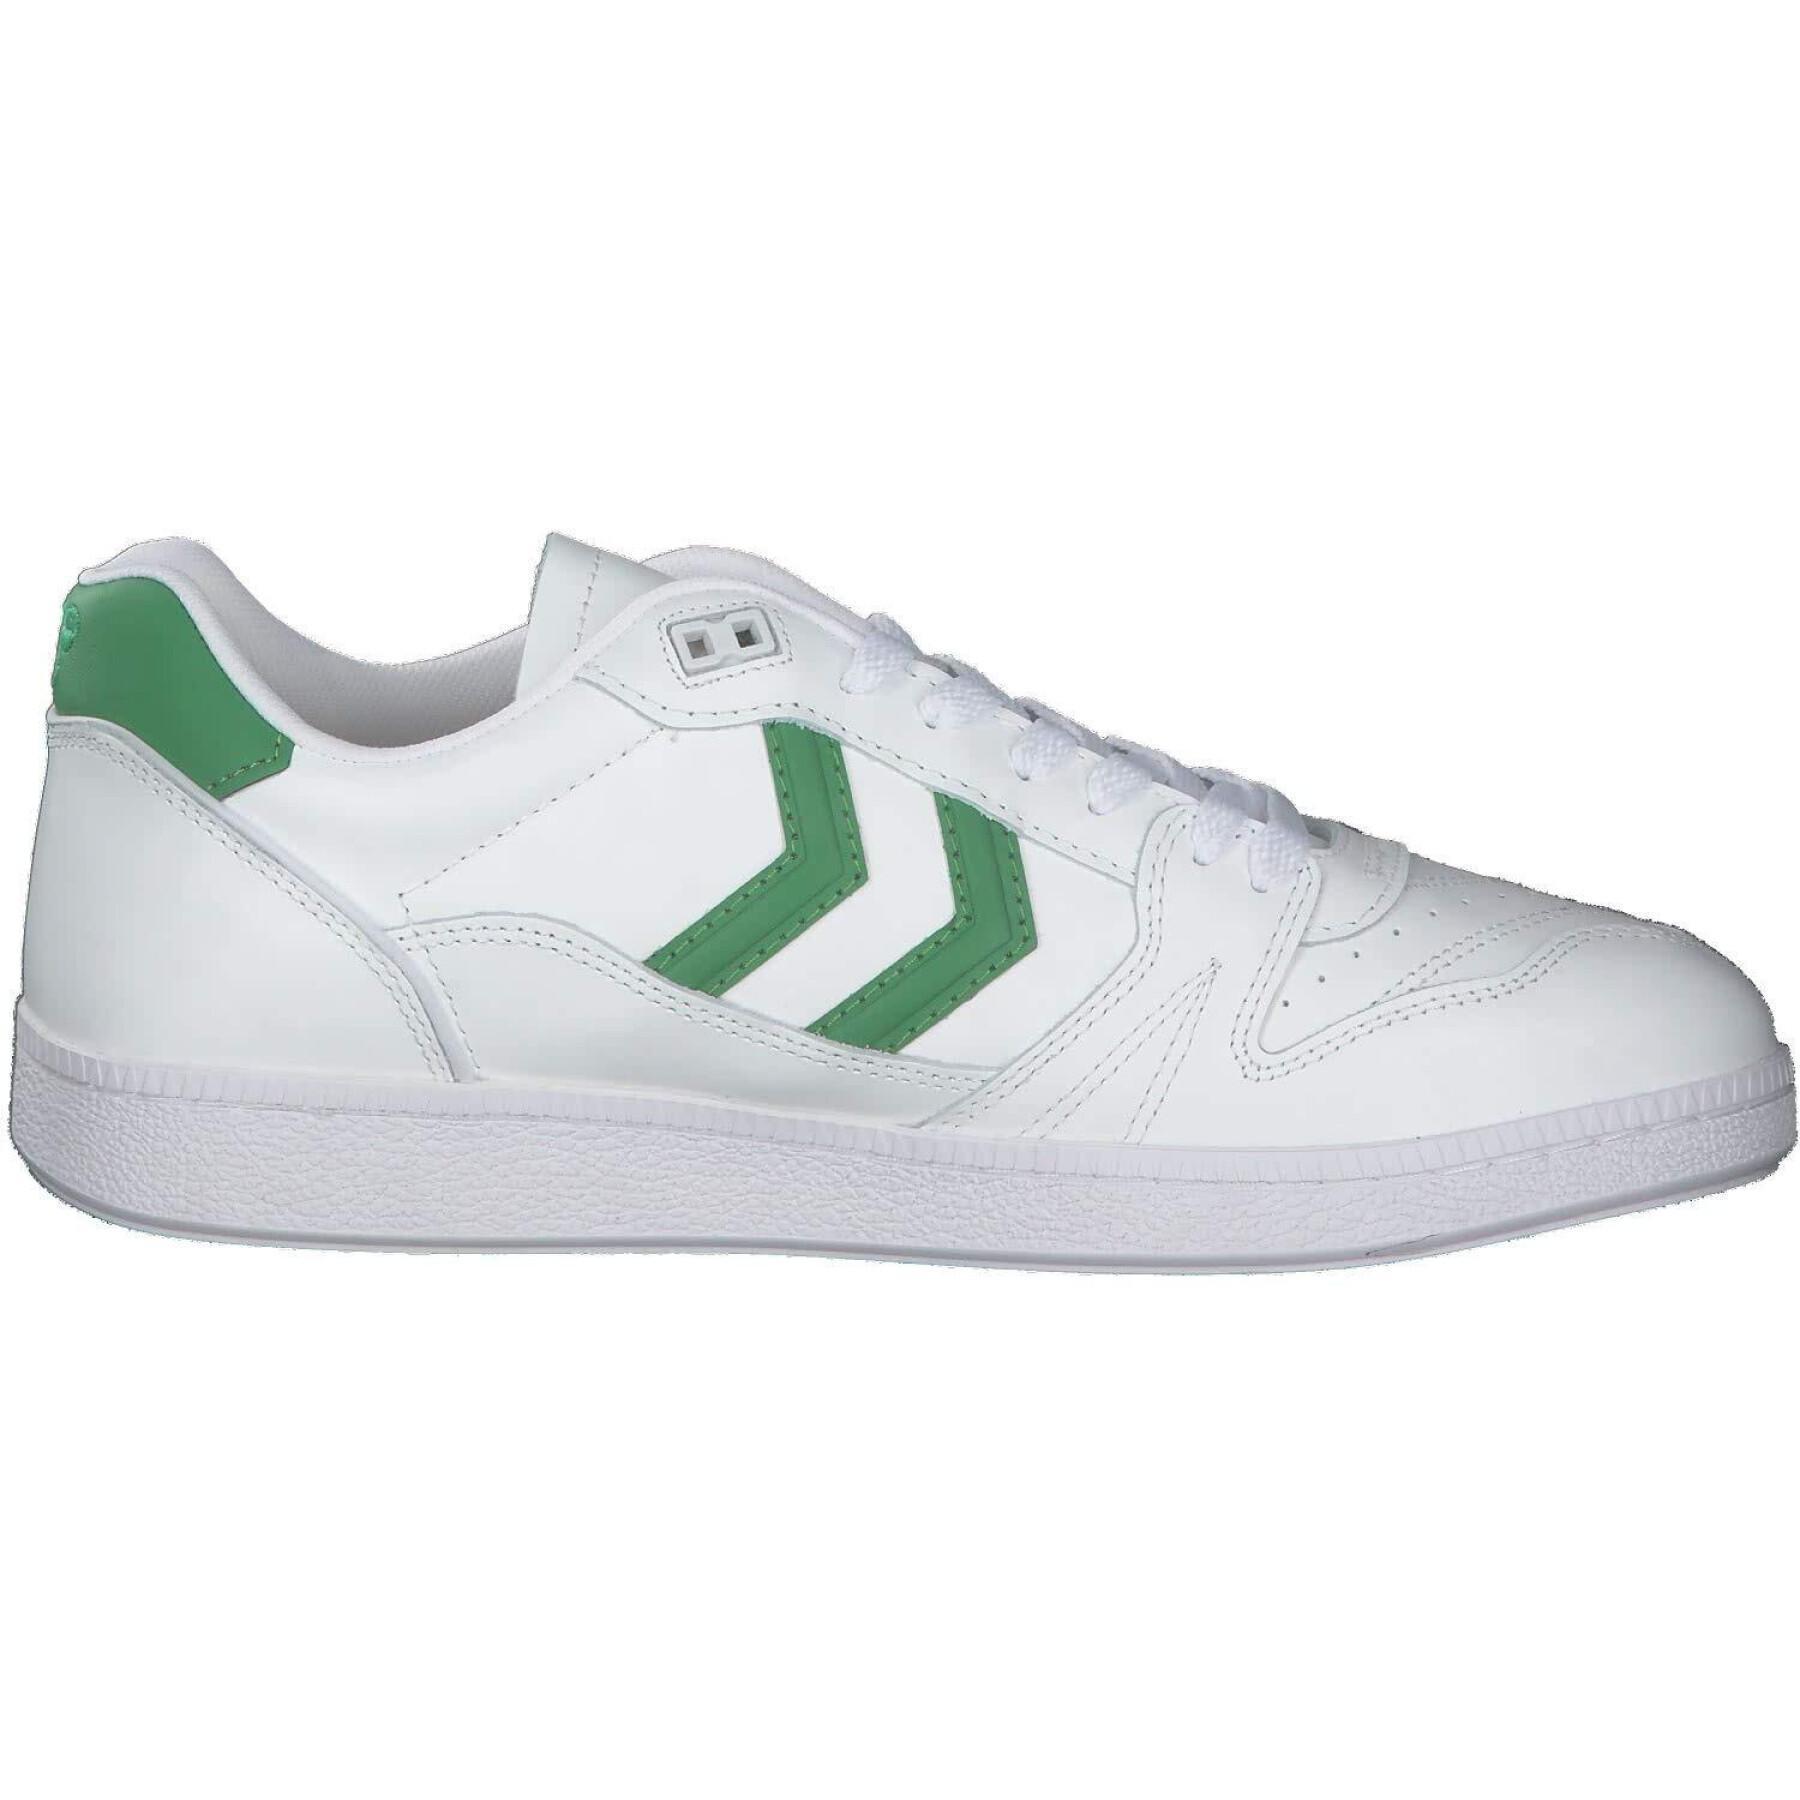 Sneakers Hummel hb team leather